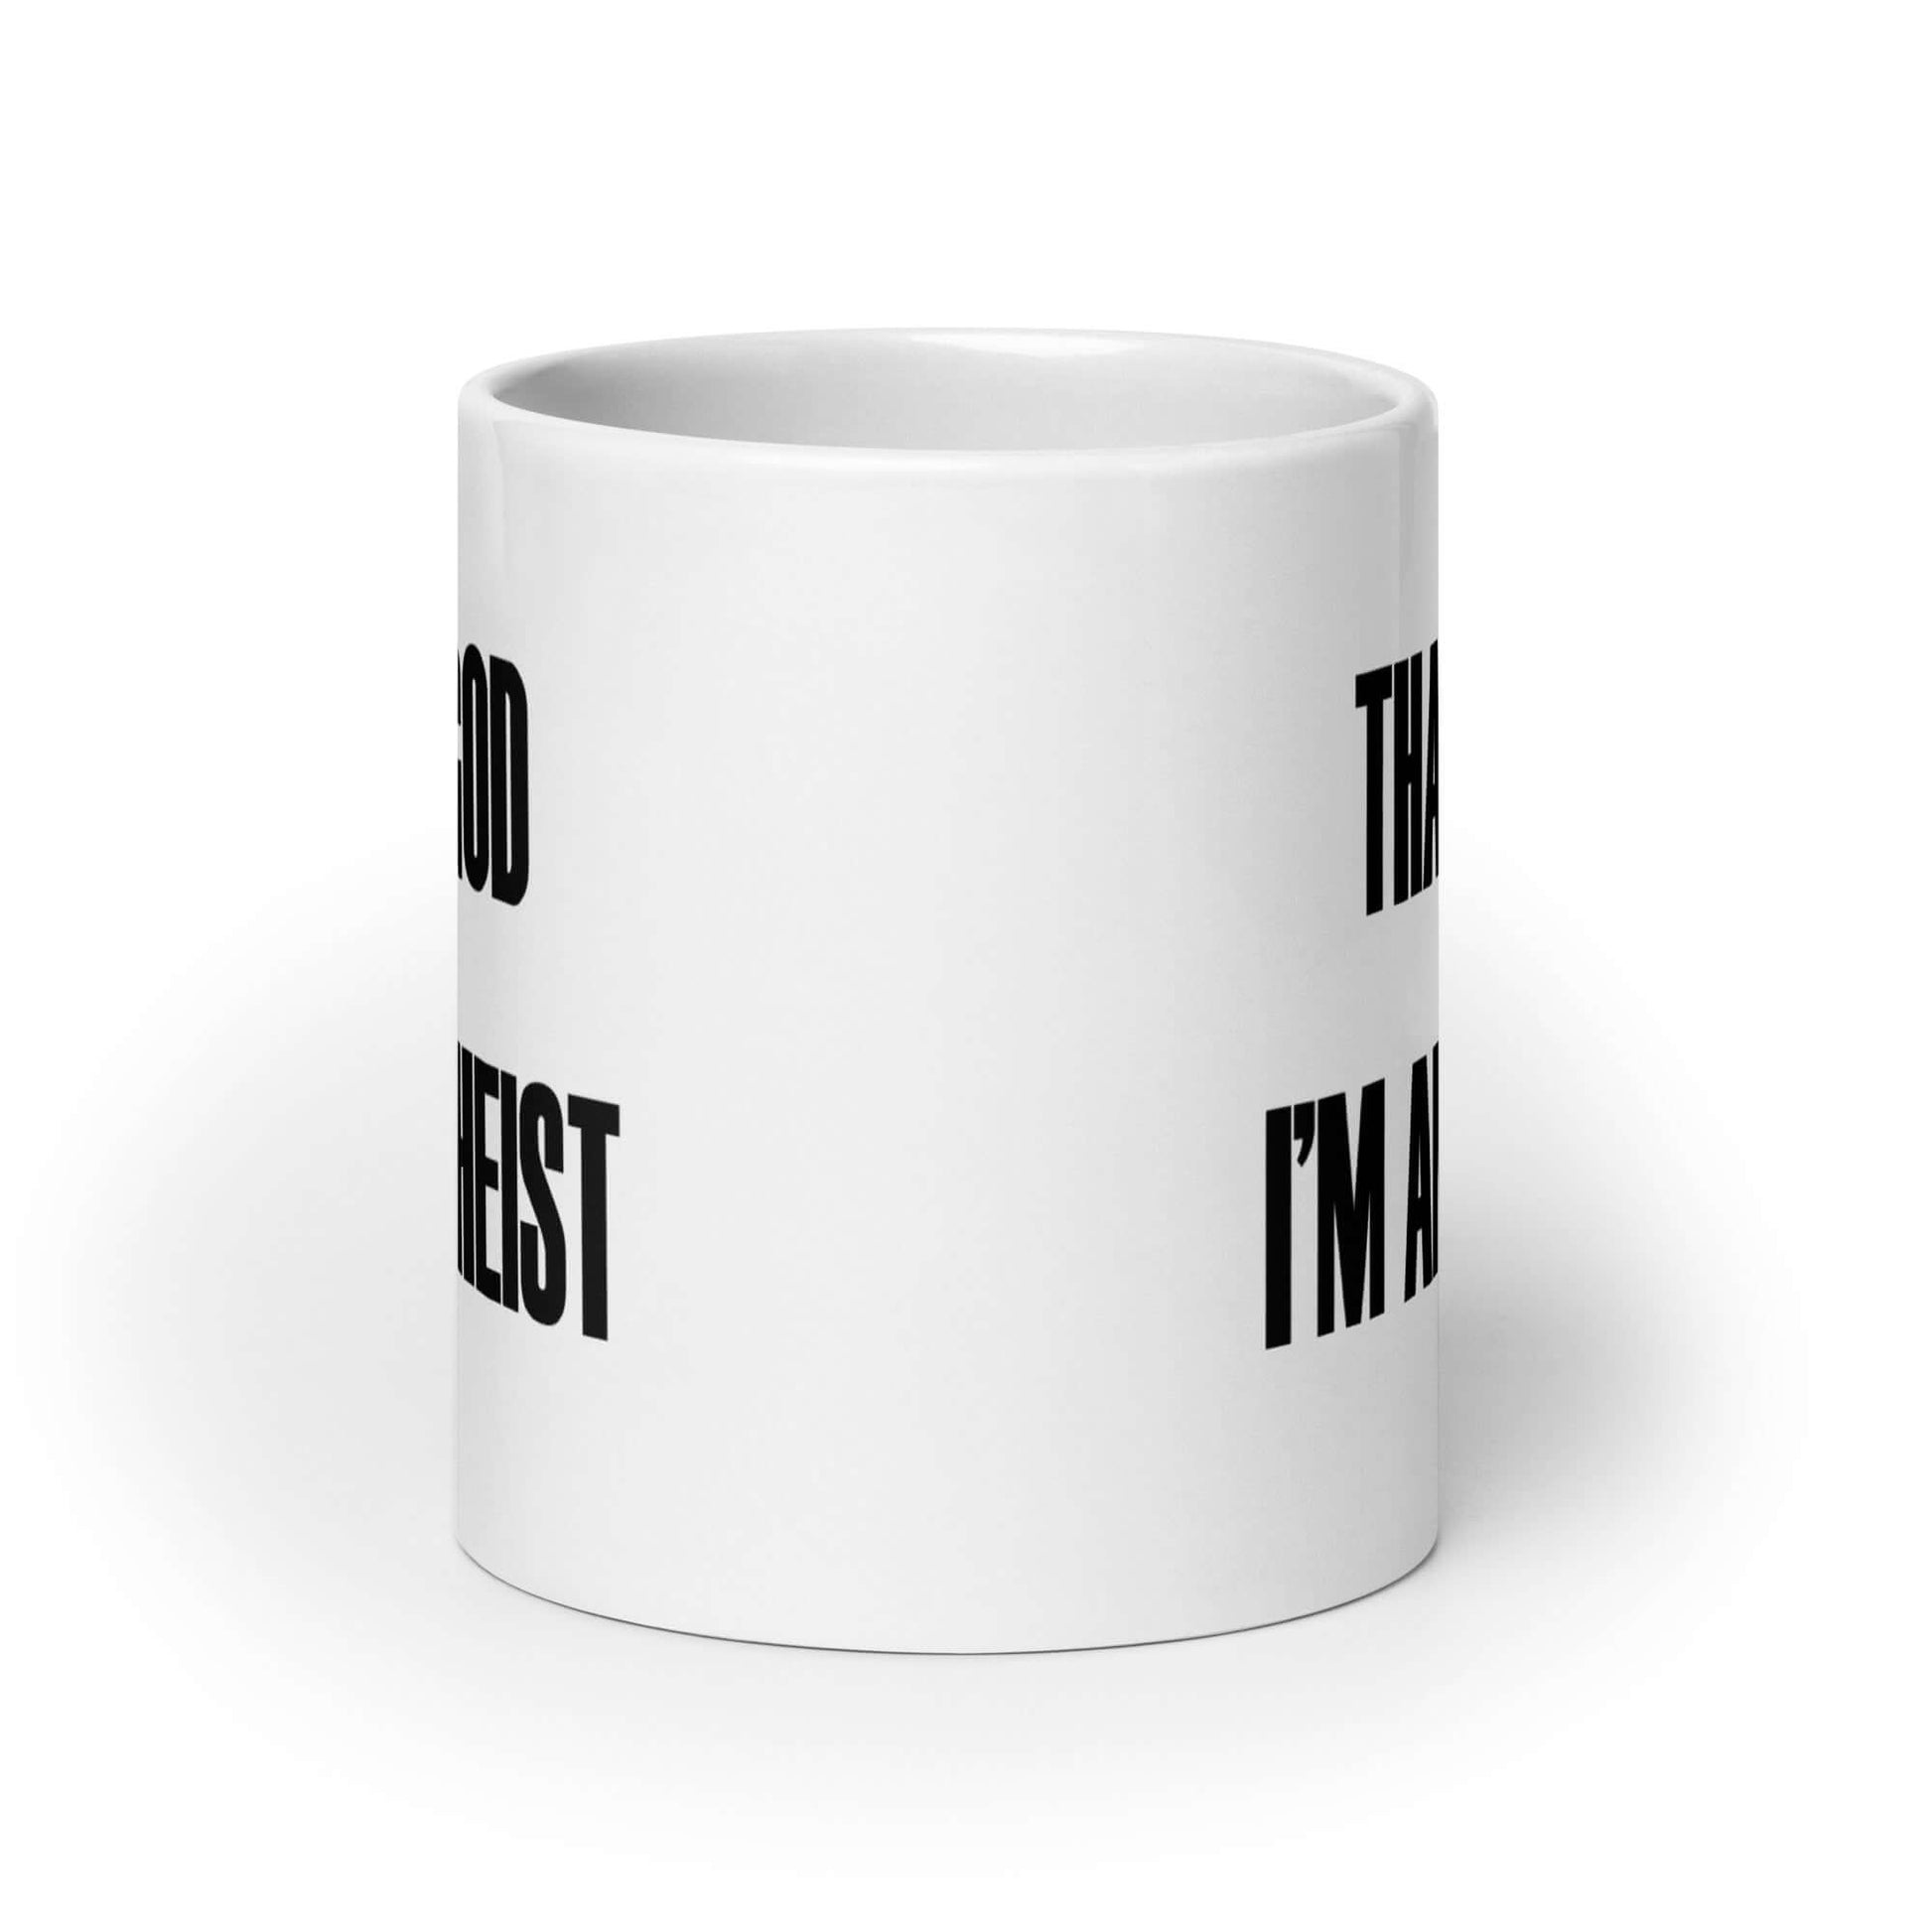 White ceramic mug with the words Thank God I'm an atheist printed on both sides.